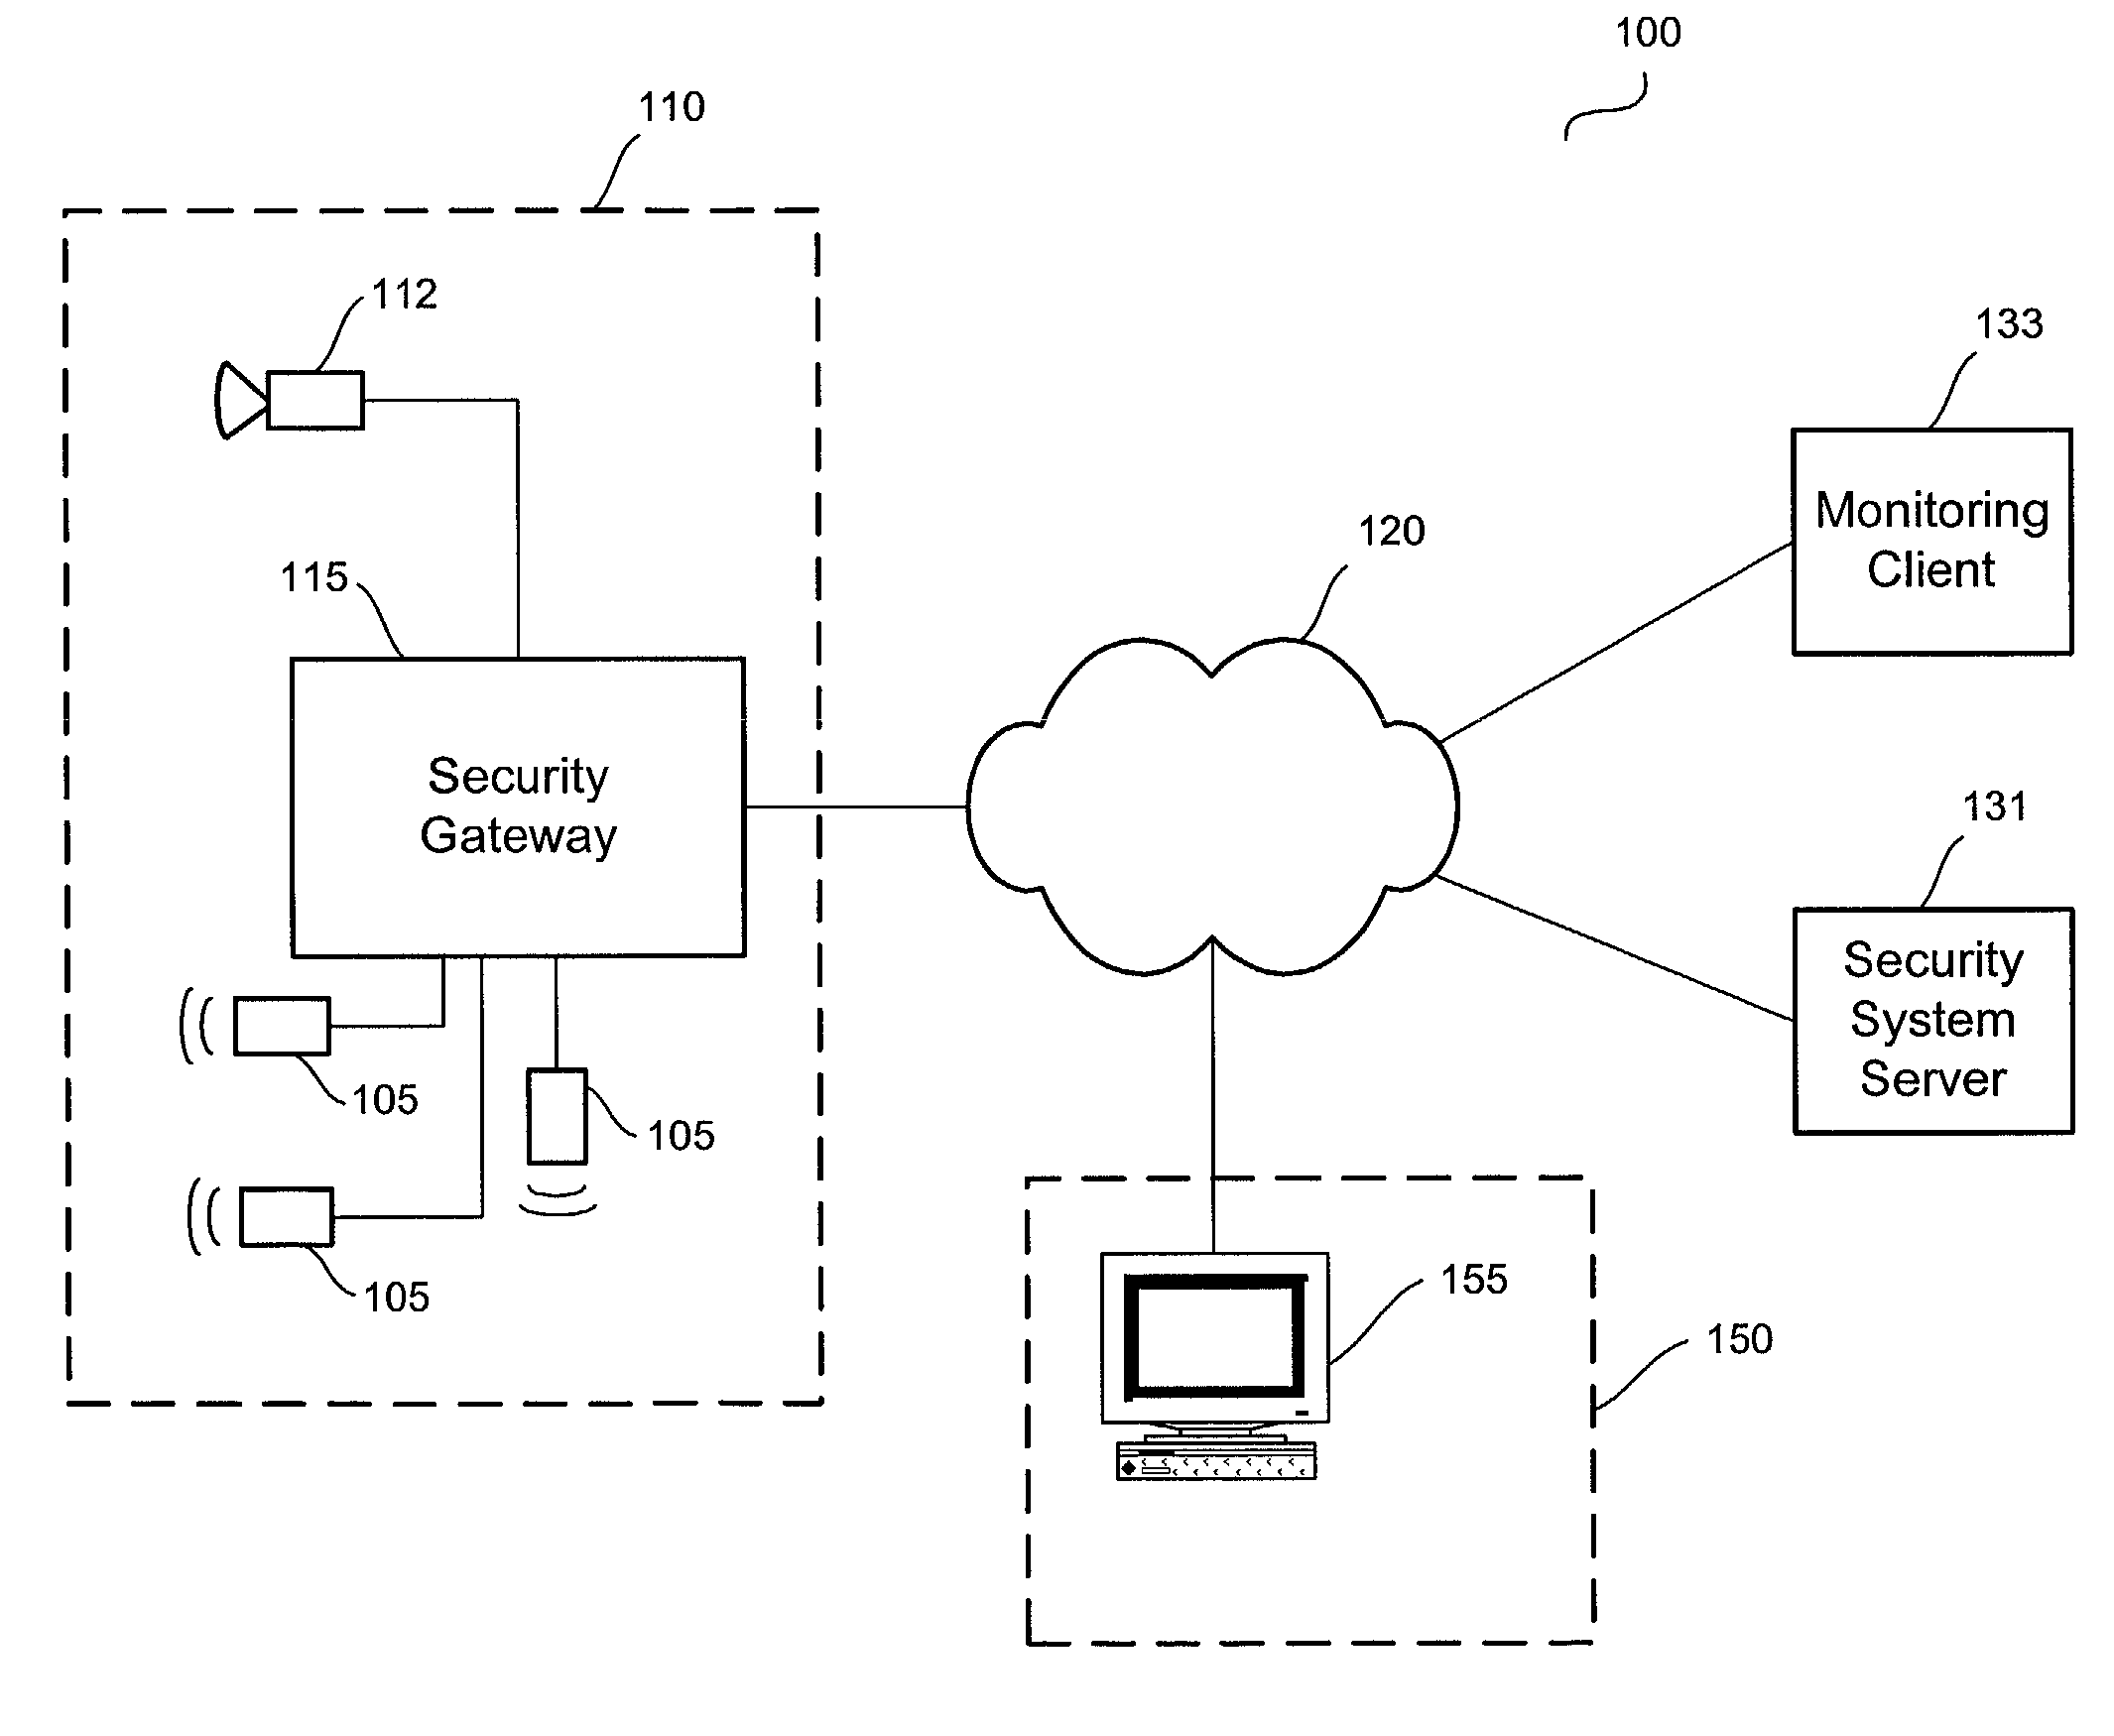 Distributed monitoring for a video security system